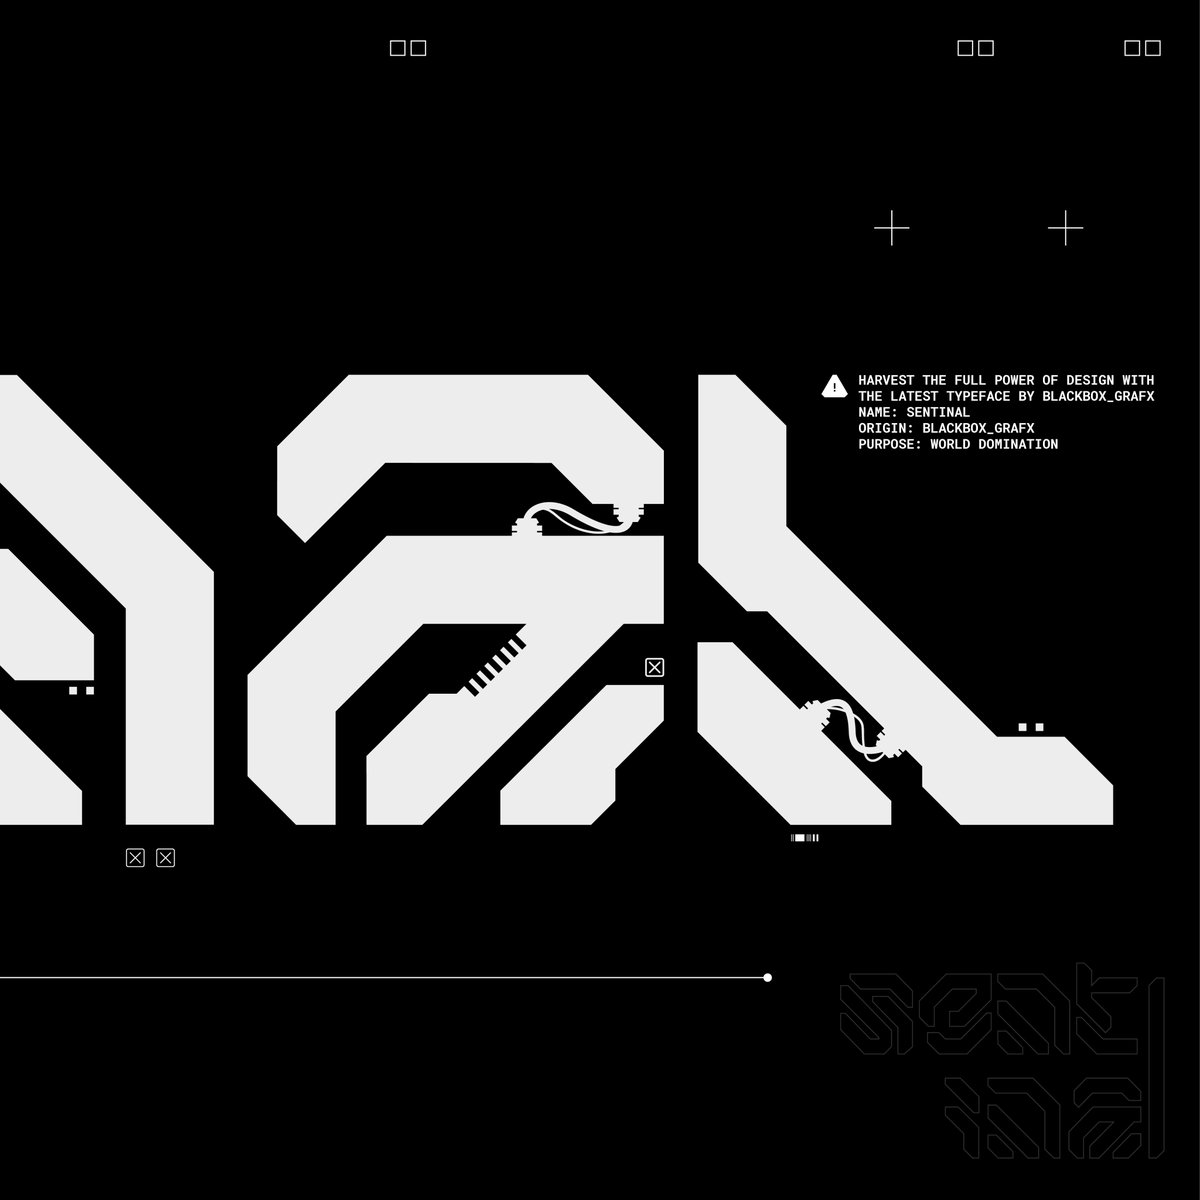 New font in progress. #designfeed #typehype #graphicdesigner #typecollect #itsnicethat #newfont #cyberpunk #y2k #options #variations #fontcollector #cyberpunk #futuristic #scifi #cyberfont #tech #techwear #displayfont #typeface